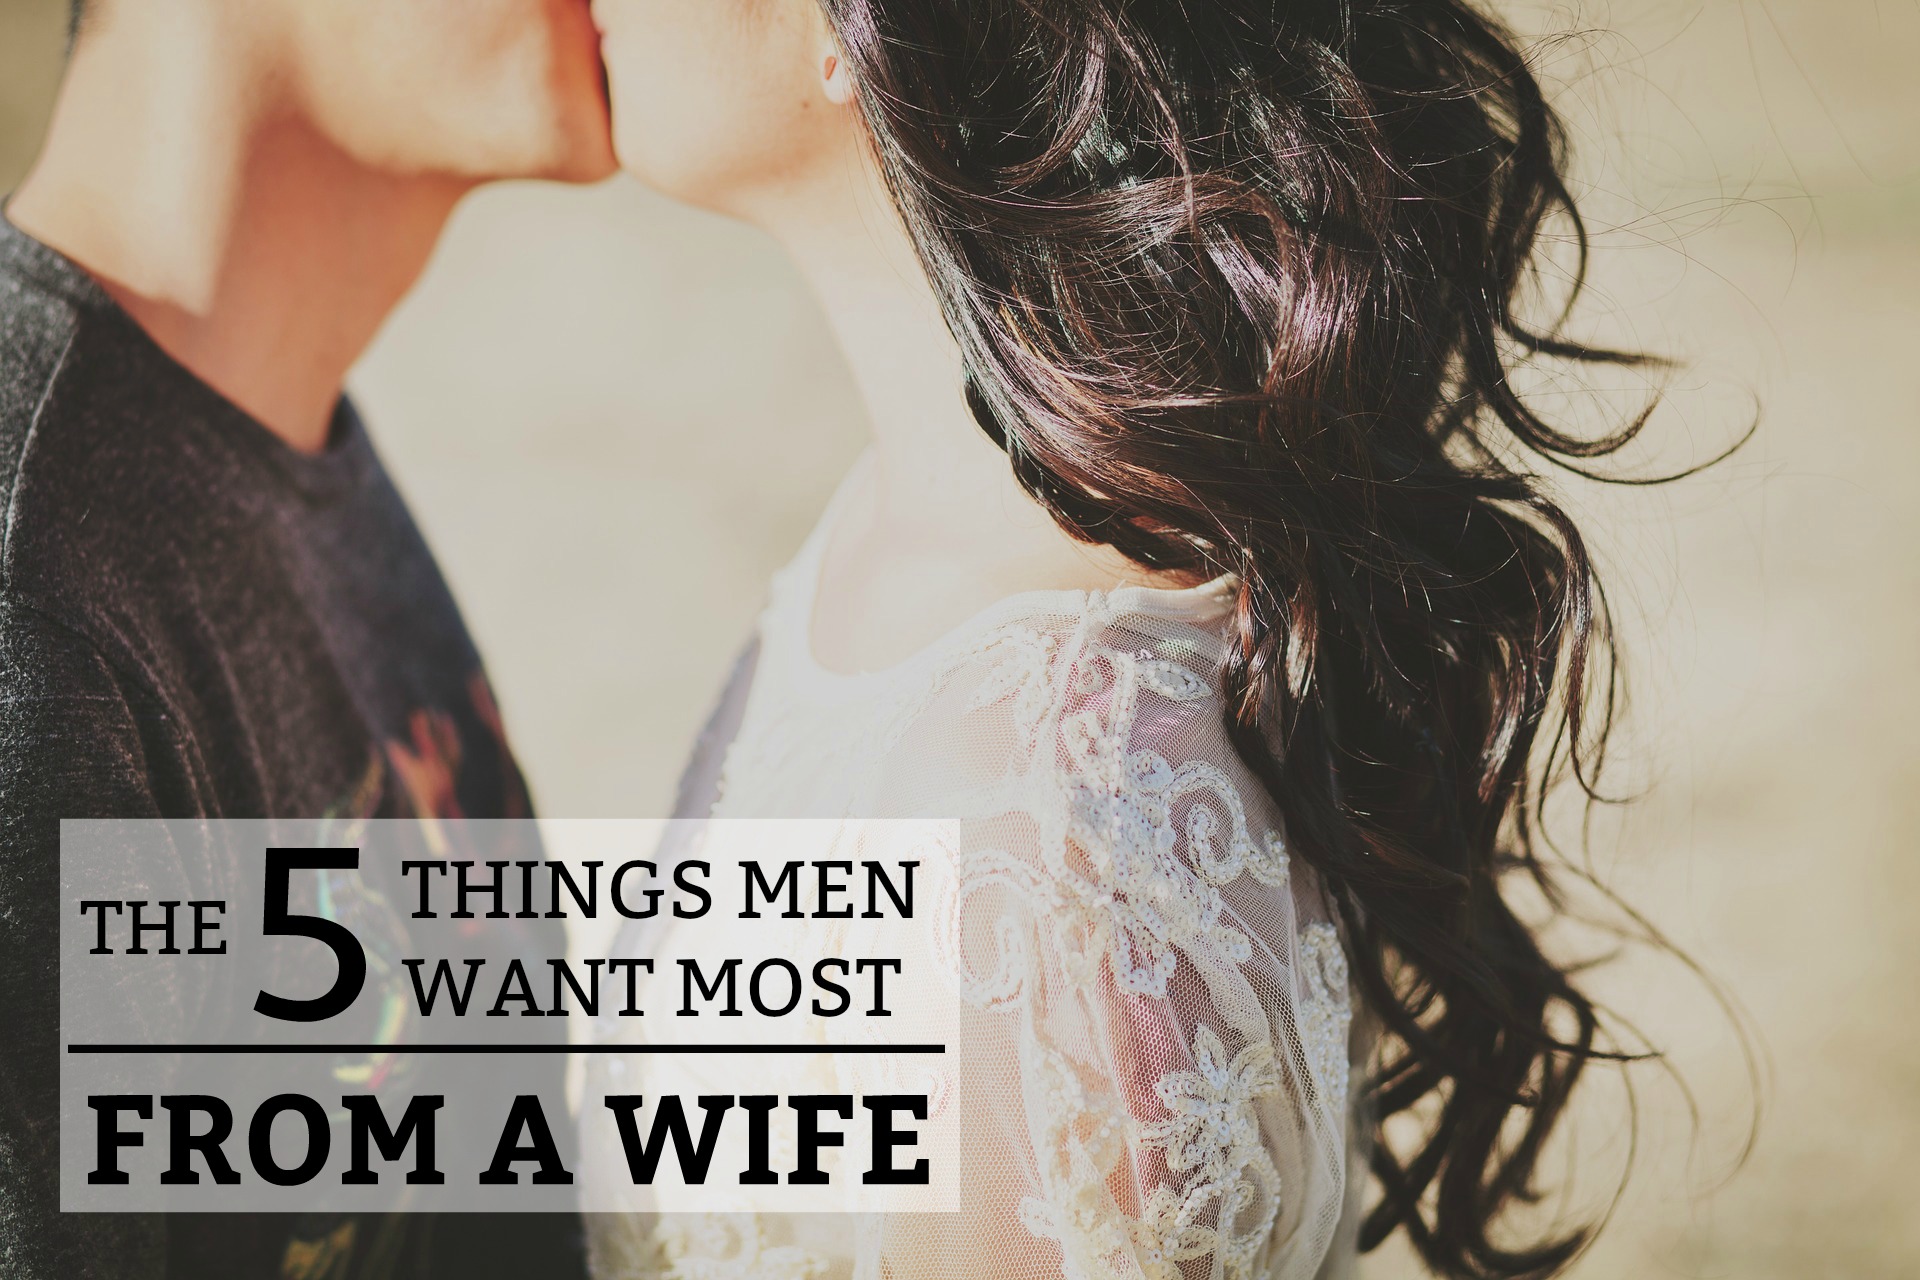 The 5 Things Men Want Most from a Wife